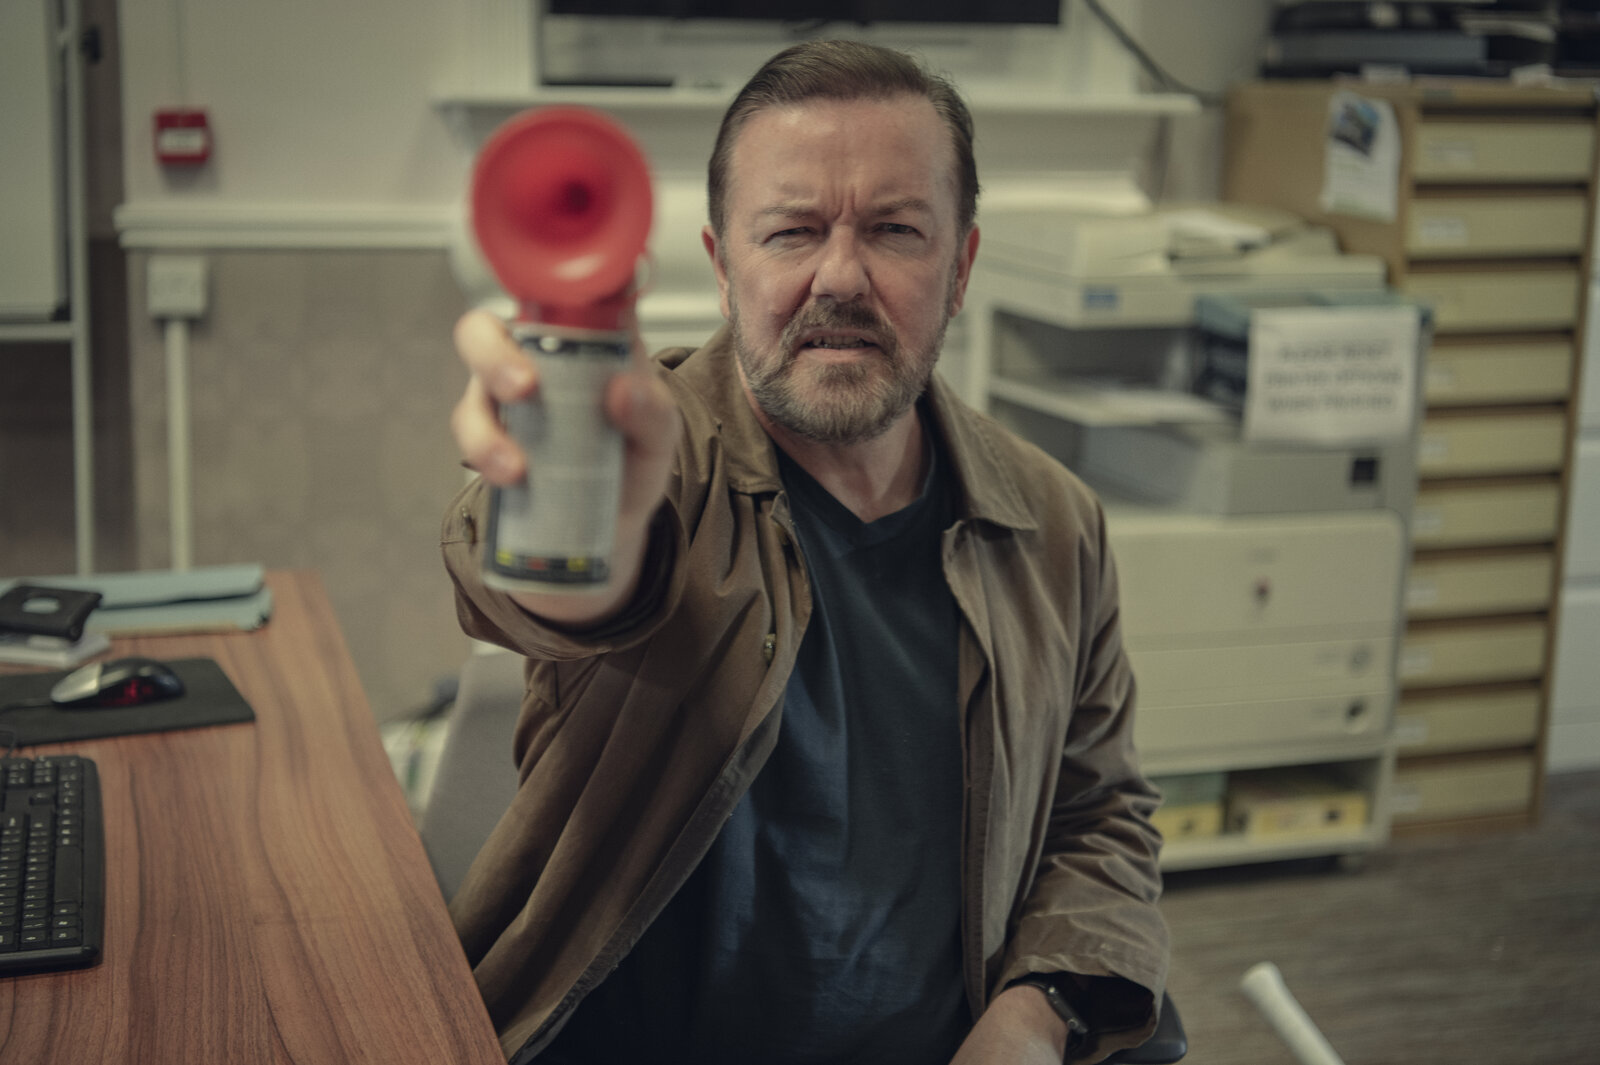 Netflix just released Season 3 of Ricky Gervais’ dark comedy After Life